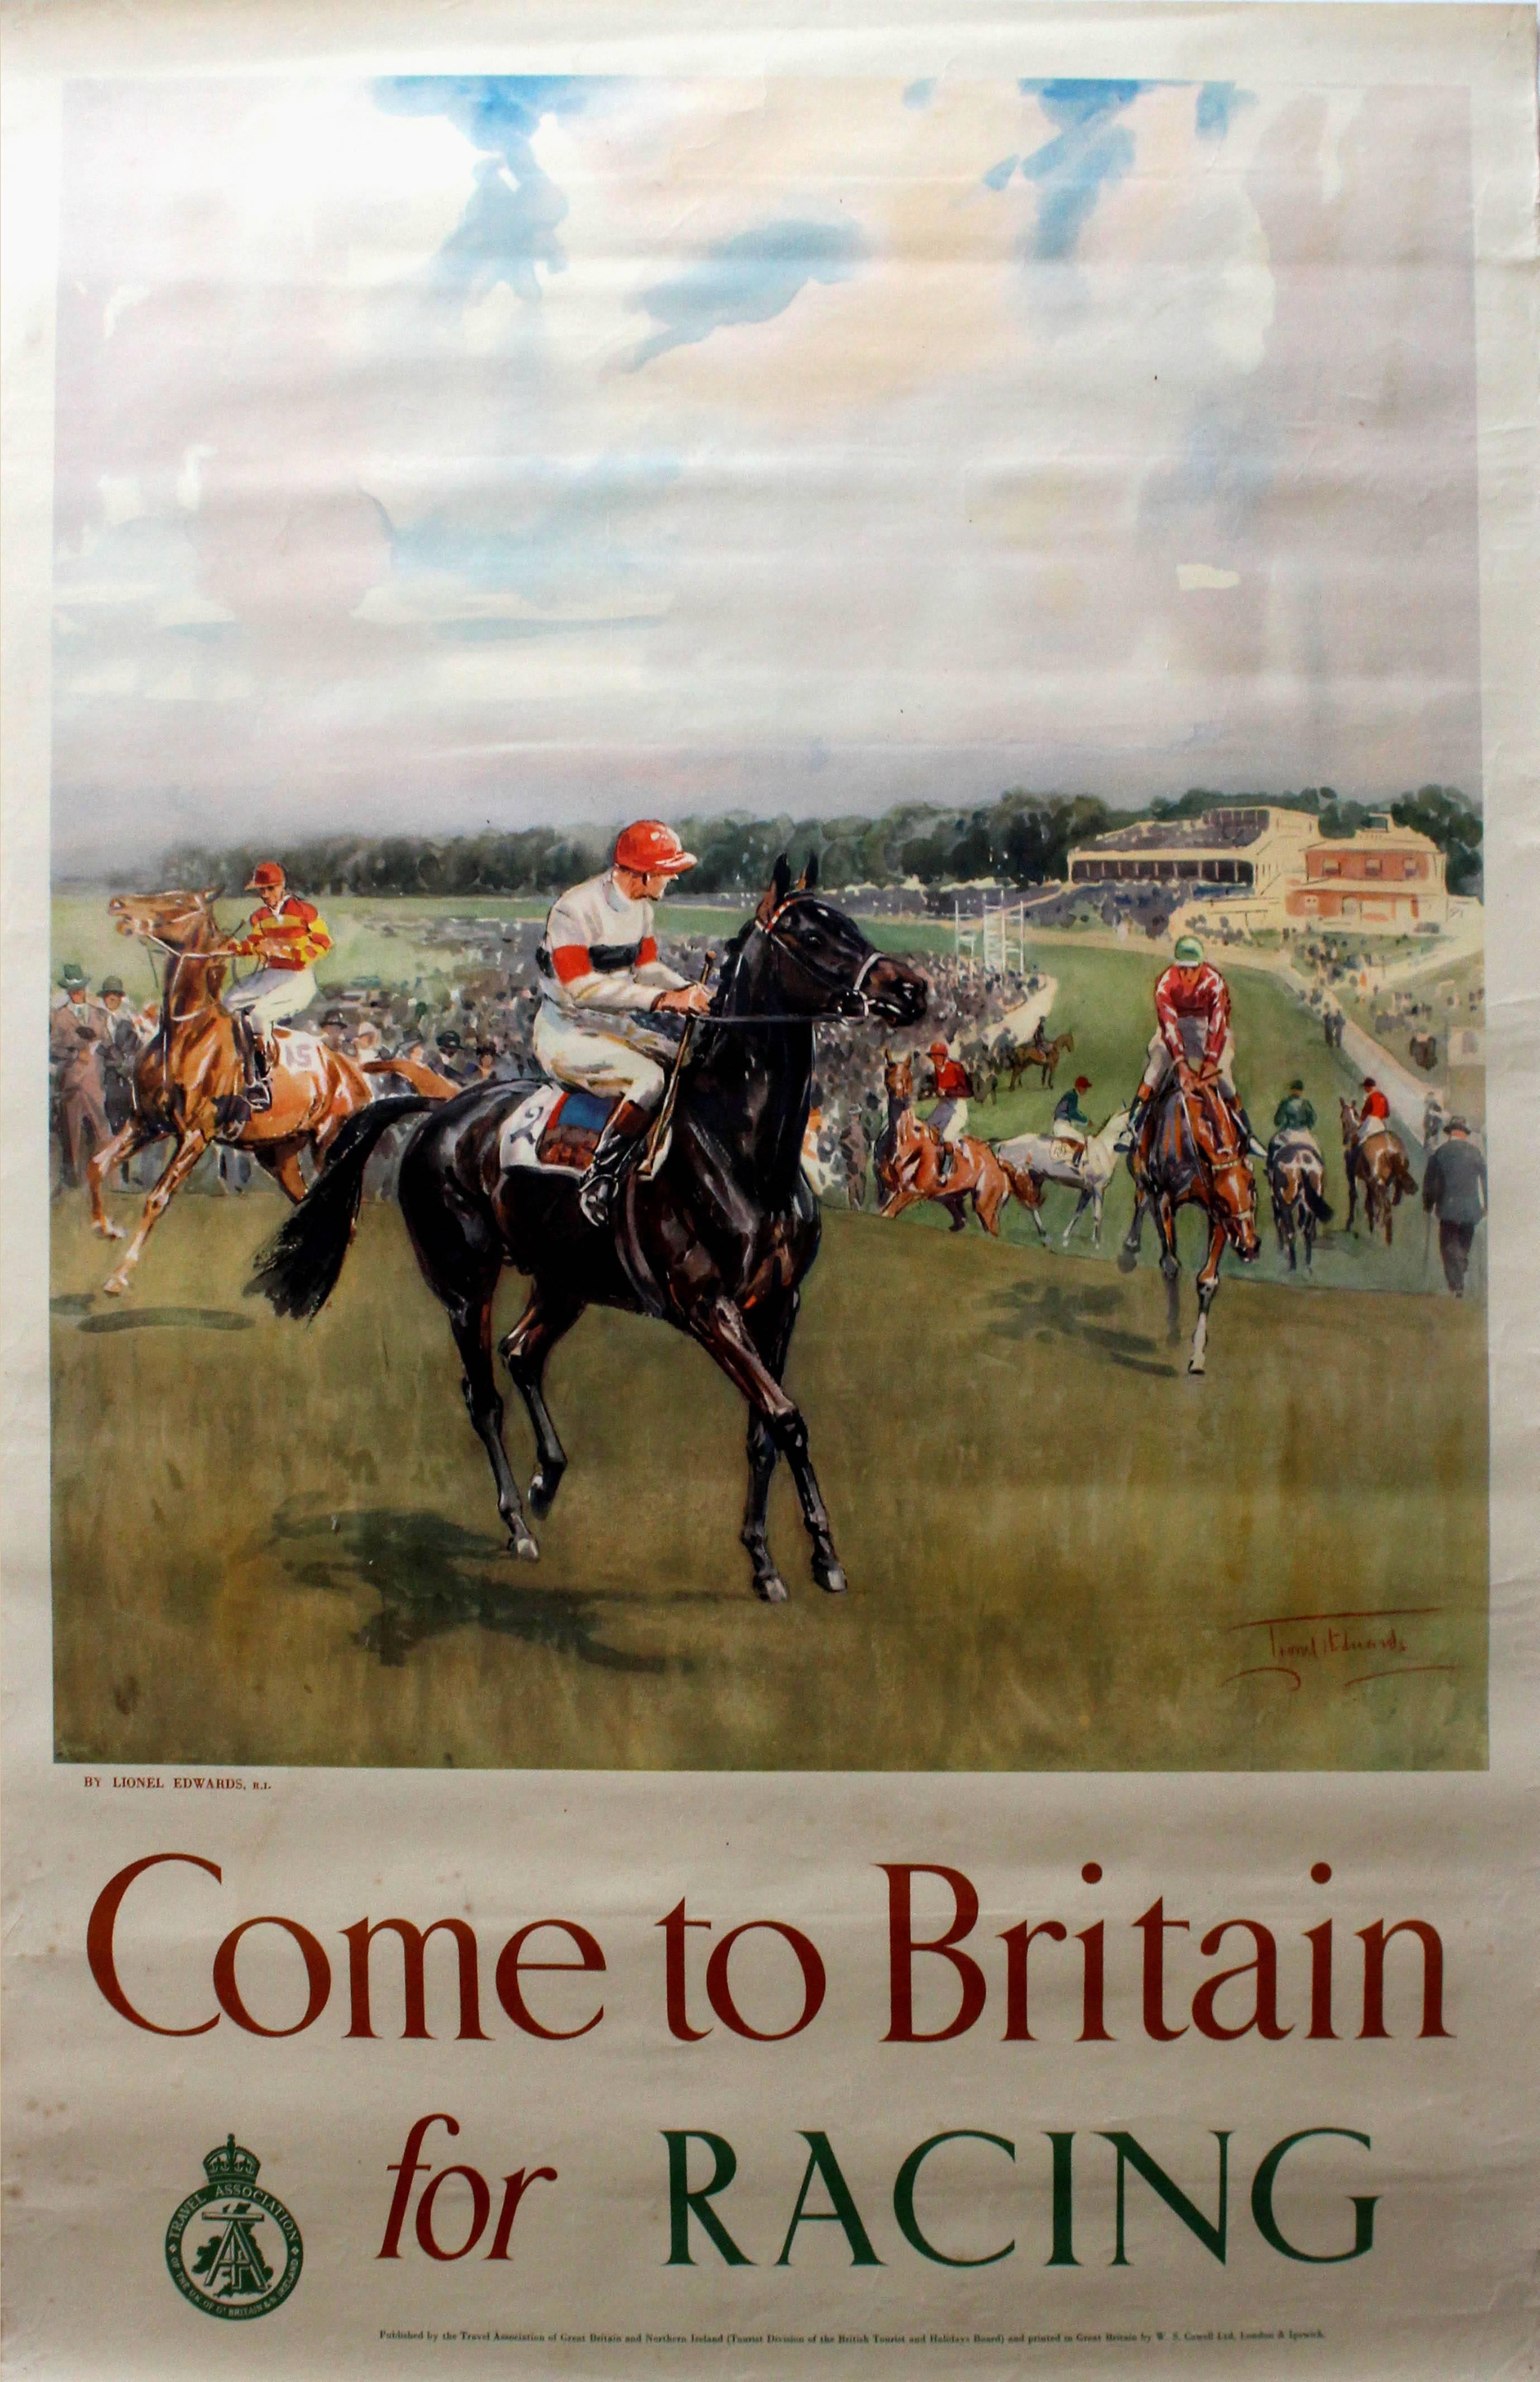 Lionel Edwards Print - Original Vintage Horse Racing Poster By LDR Edwards - Come To Britain For Racing